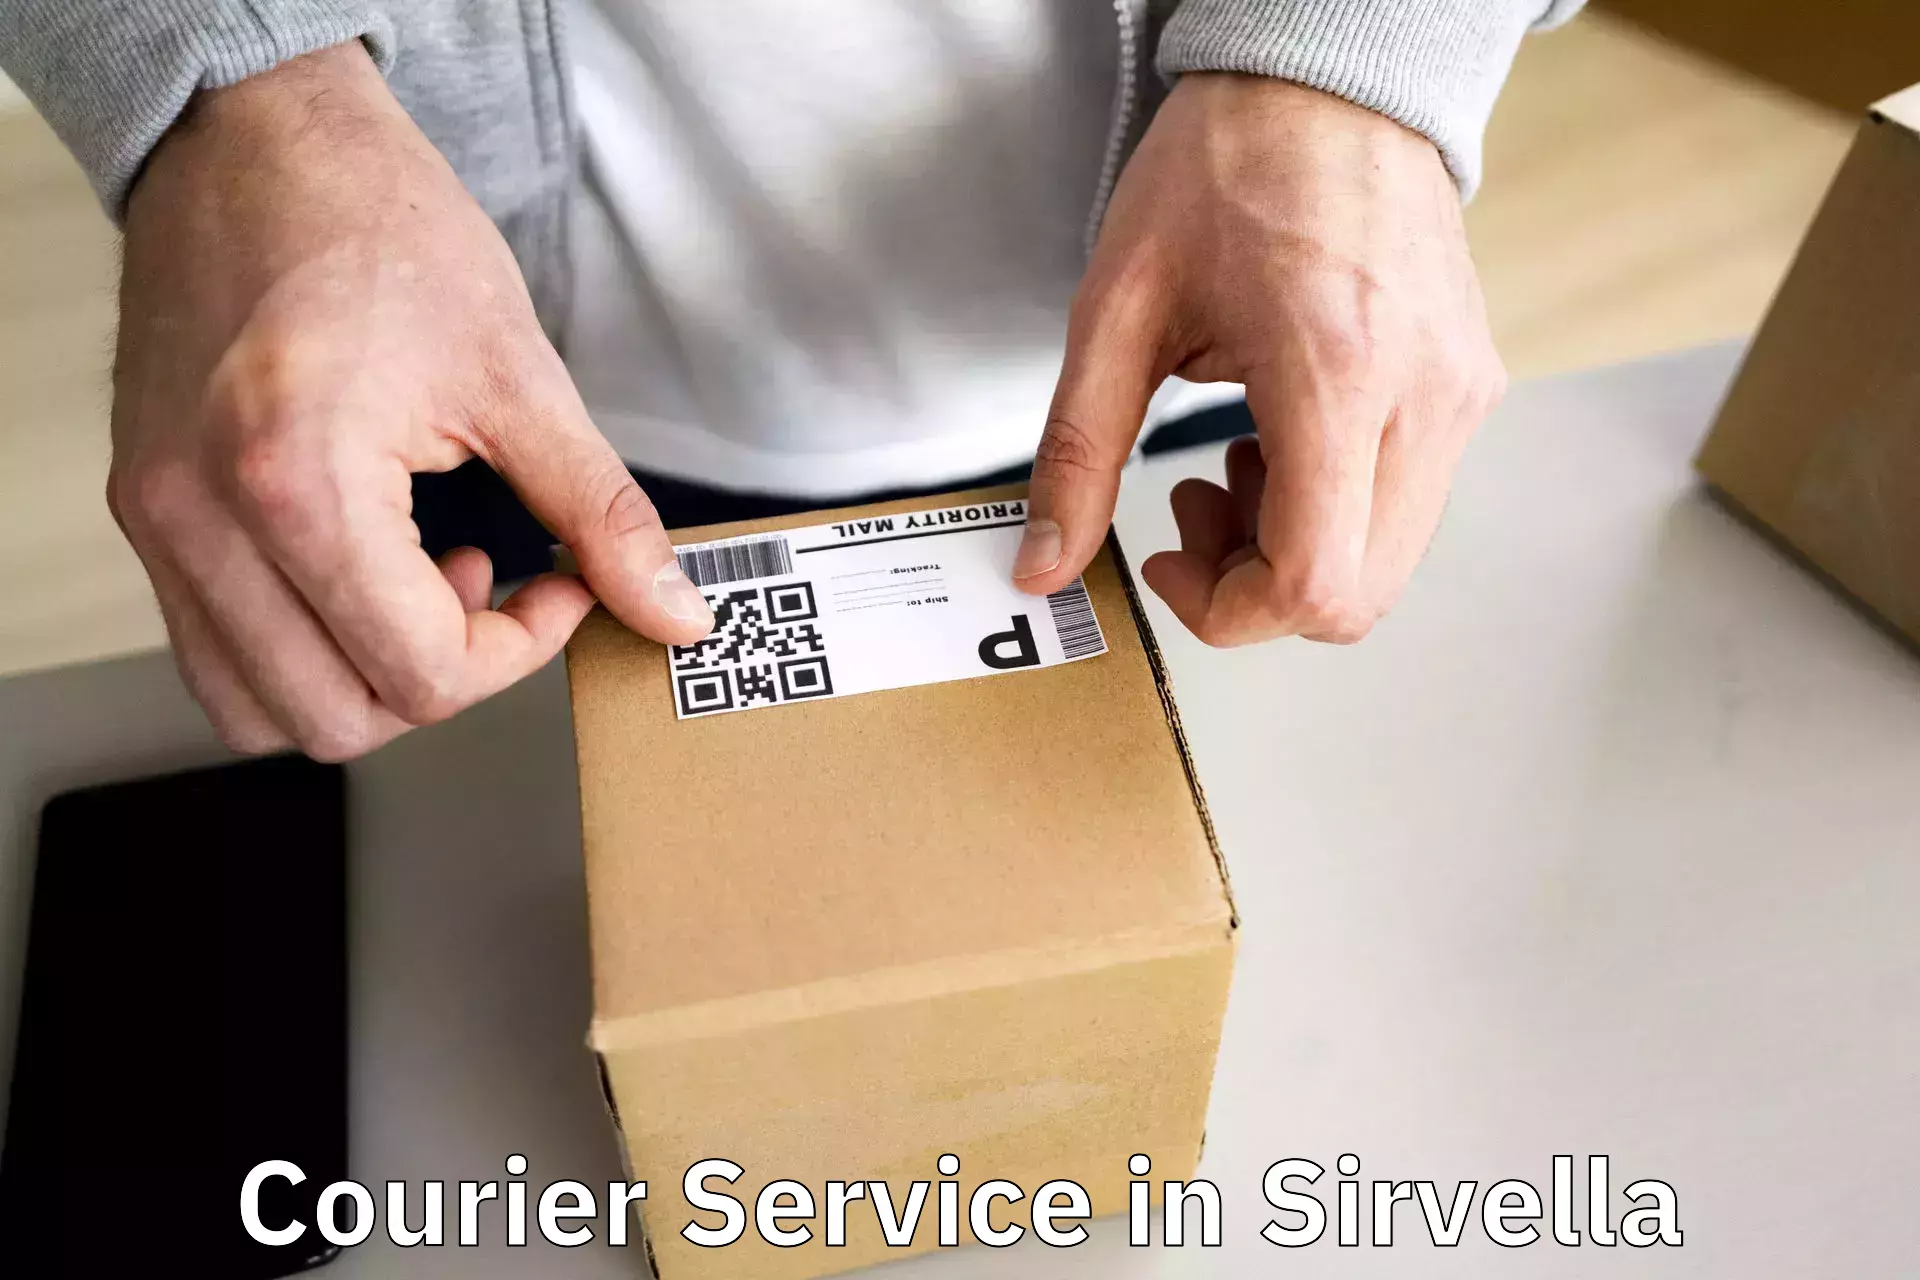 Punctual parcel services in Sirvella